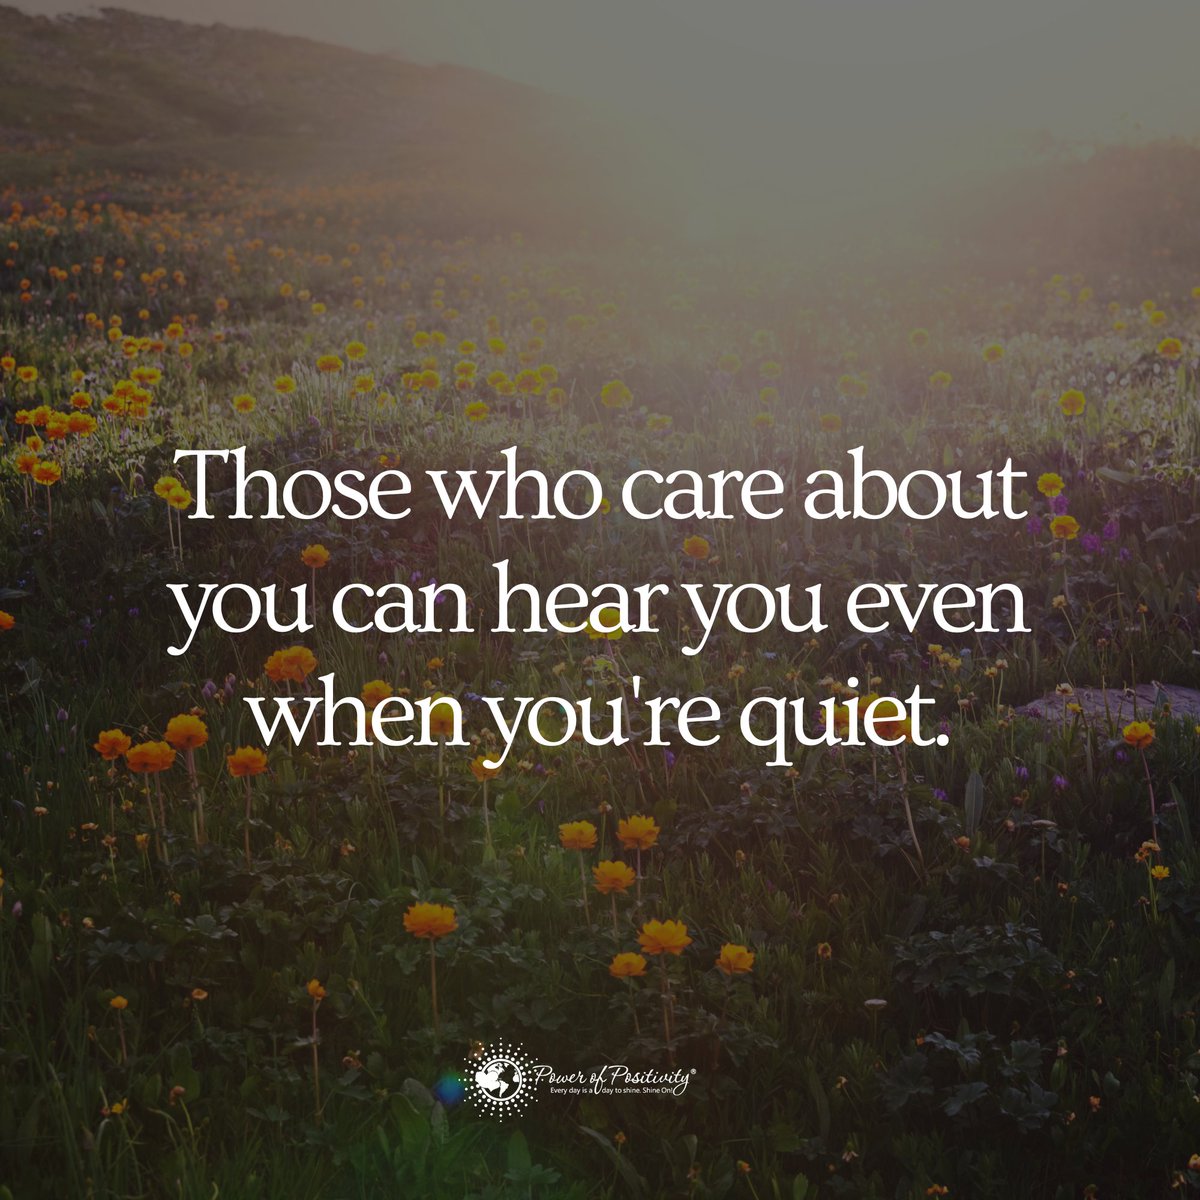 Those who care about you can hear you even when you're quiet.